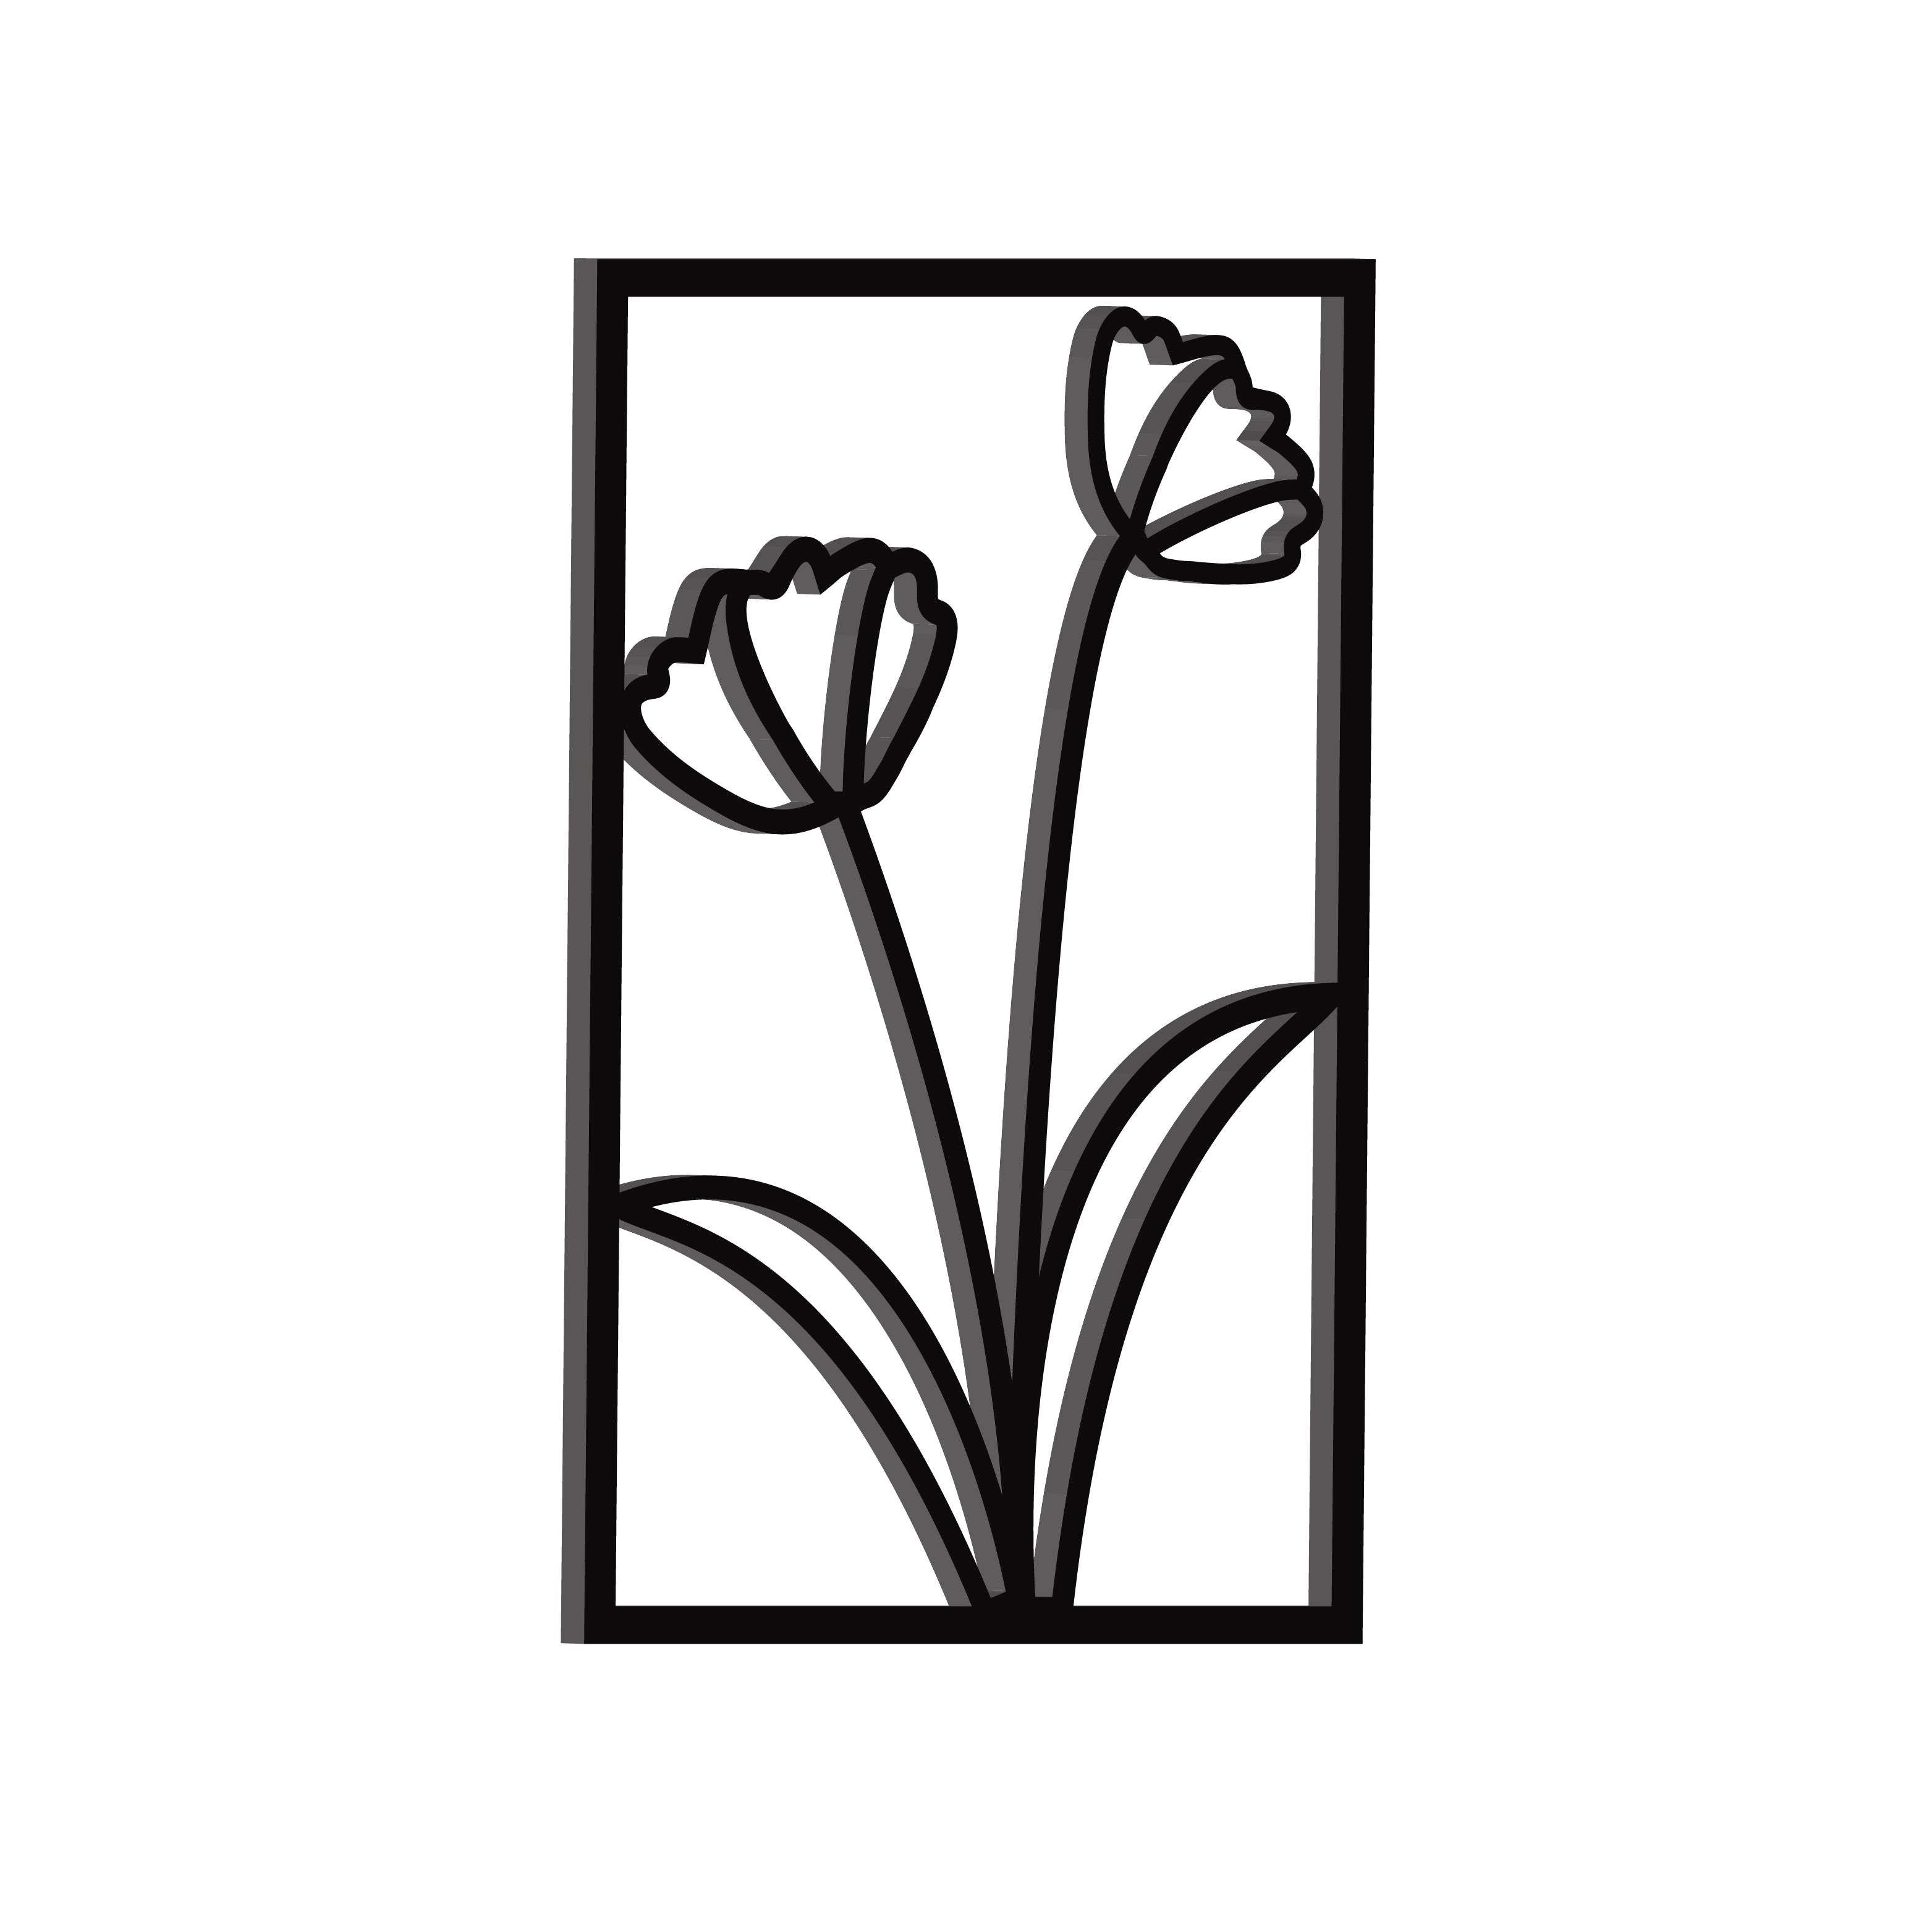 "Flower frame" Black Engineered Wood Wall Art Cutout, Ready to Hang Home Decor 4